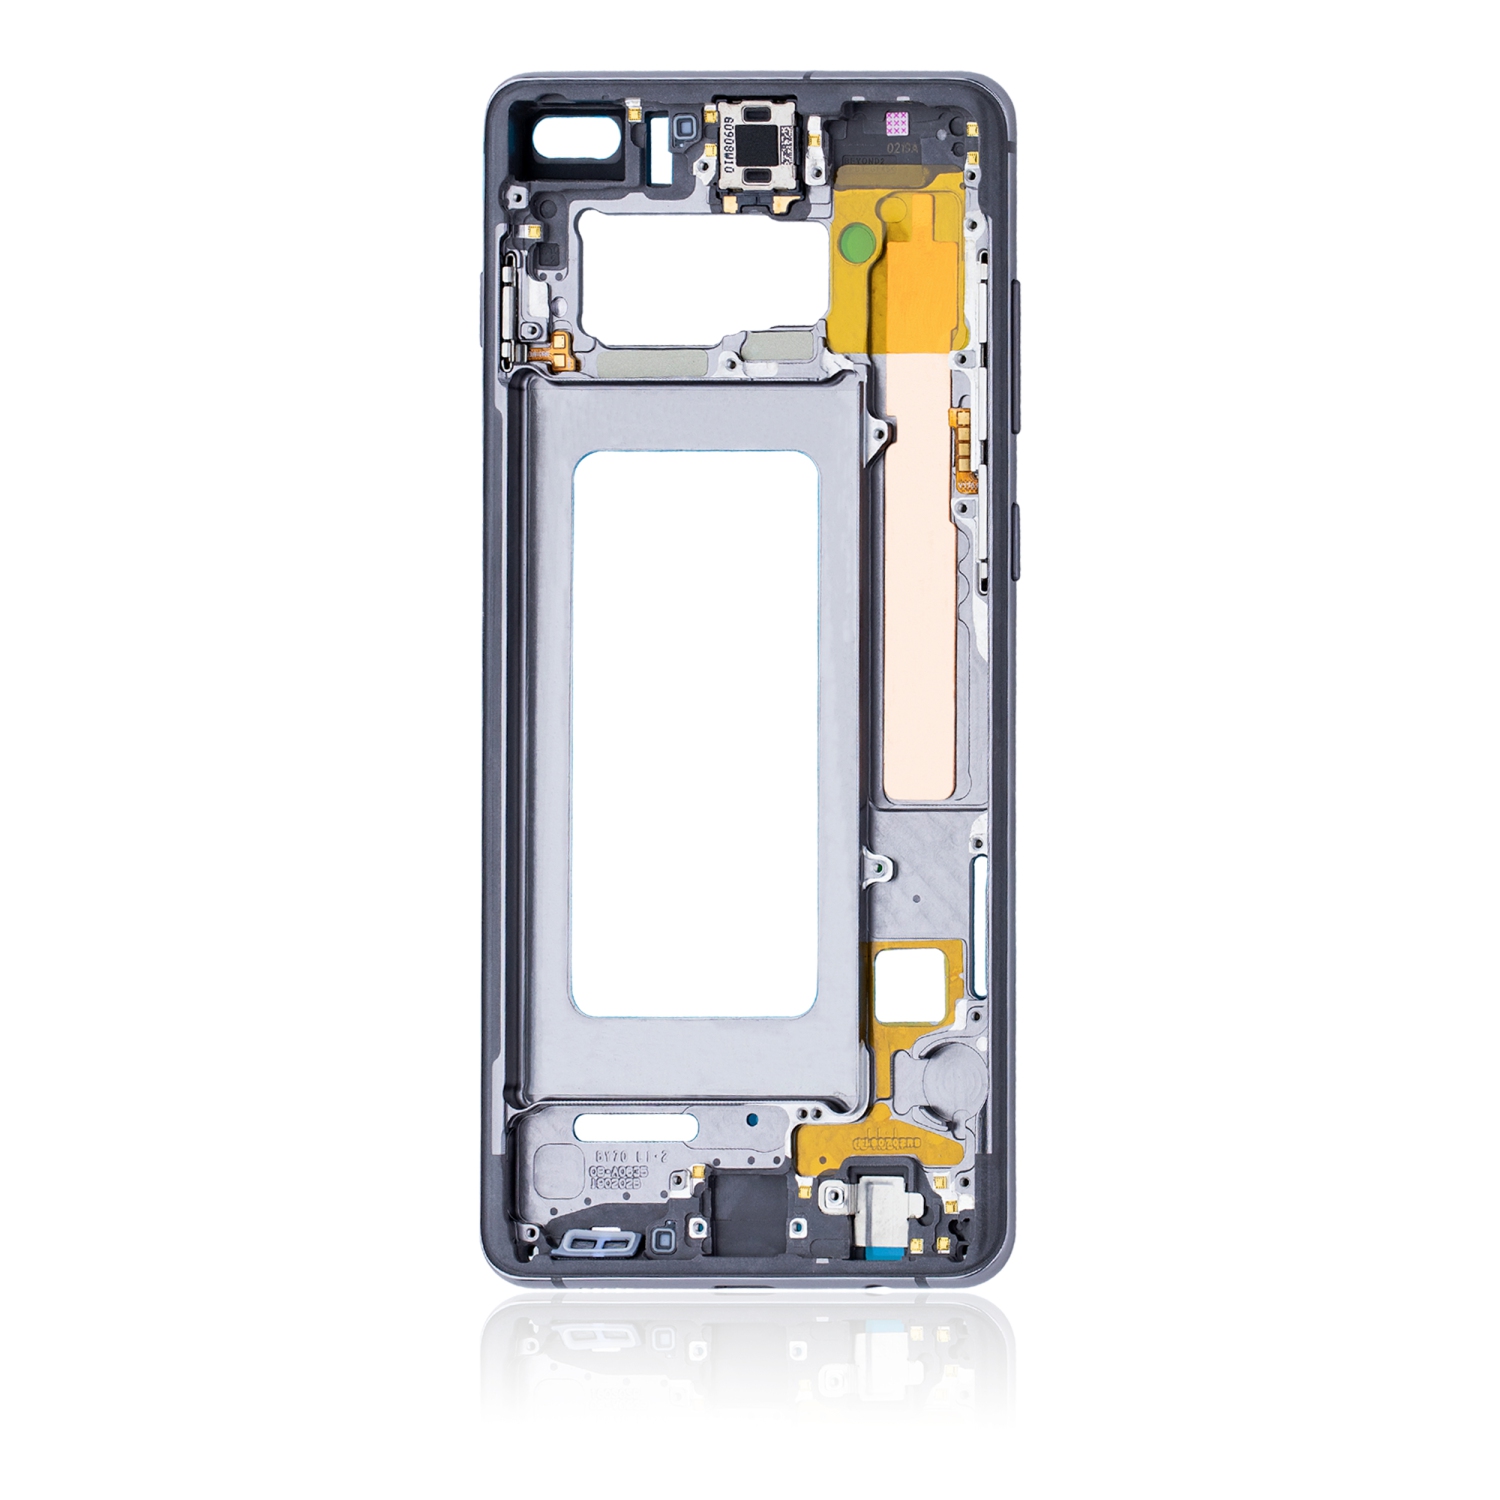 Replacement Mid-Frame Housing Compatible For Samsung Galaxy S10 Plus (With Small Parts) (Prism Black)